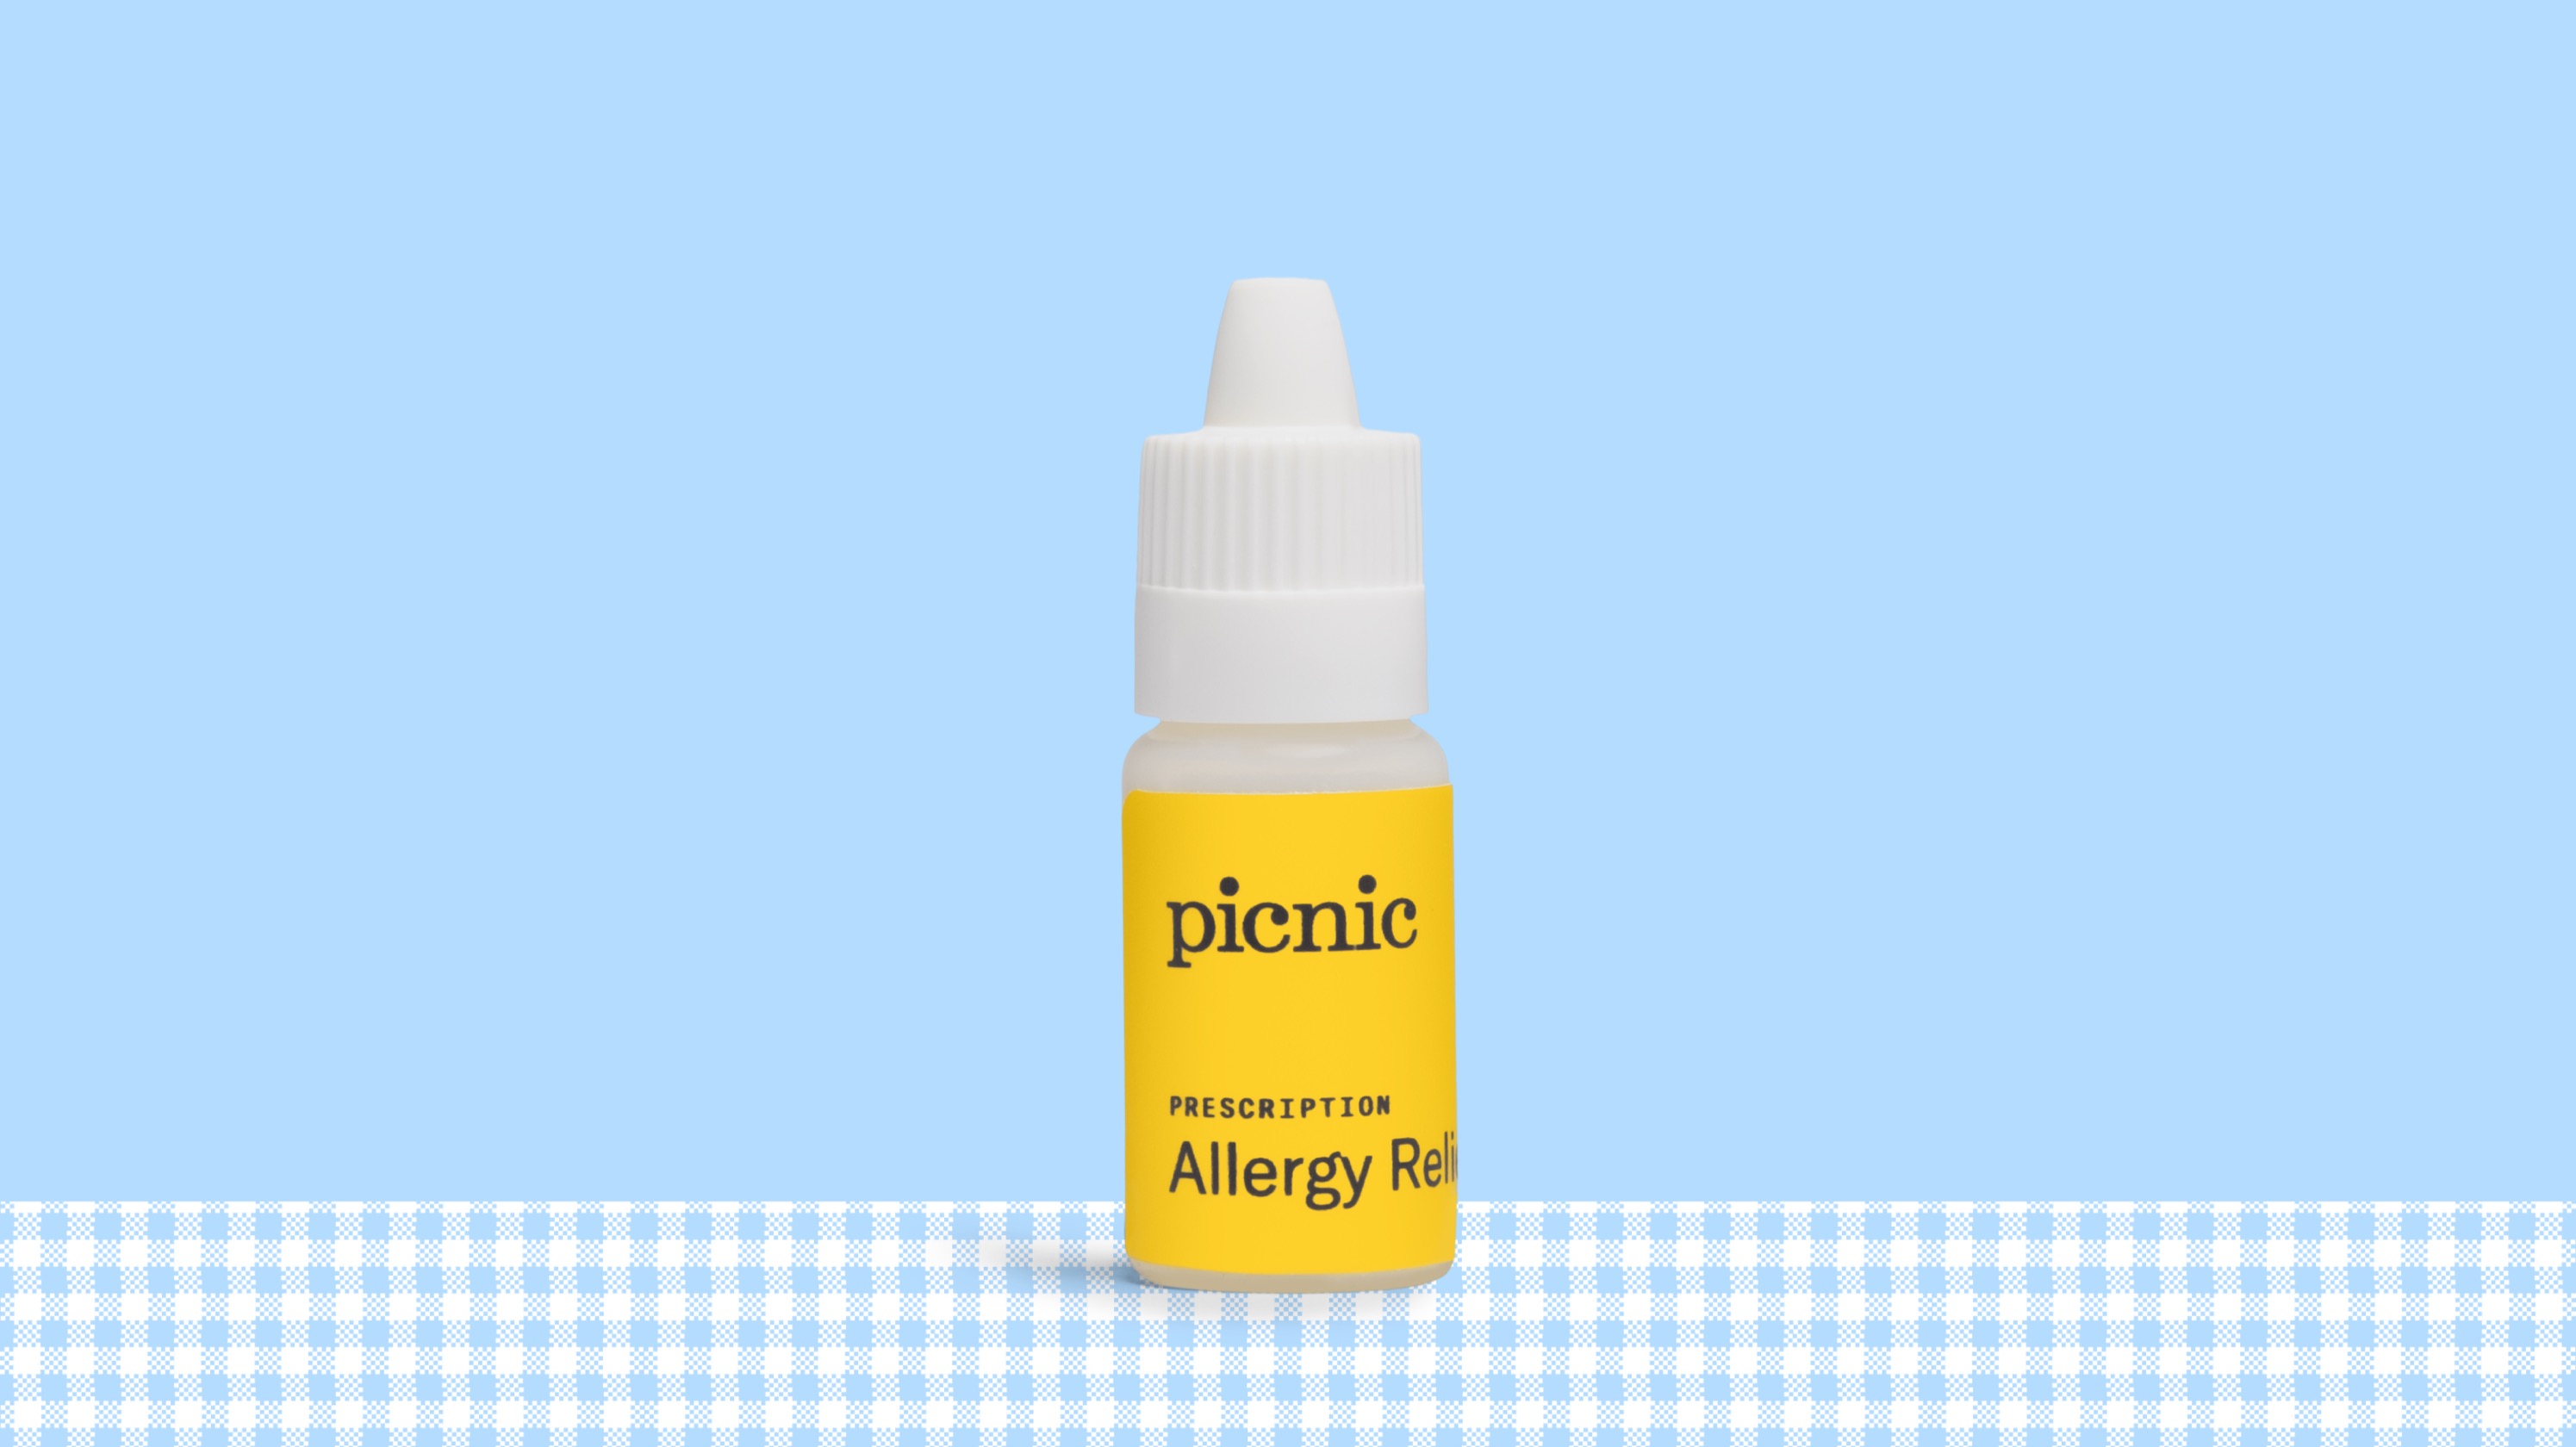 Picnic's prescription eye drops in front of a blue and white background.